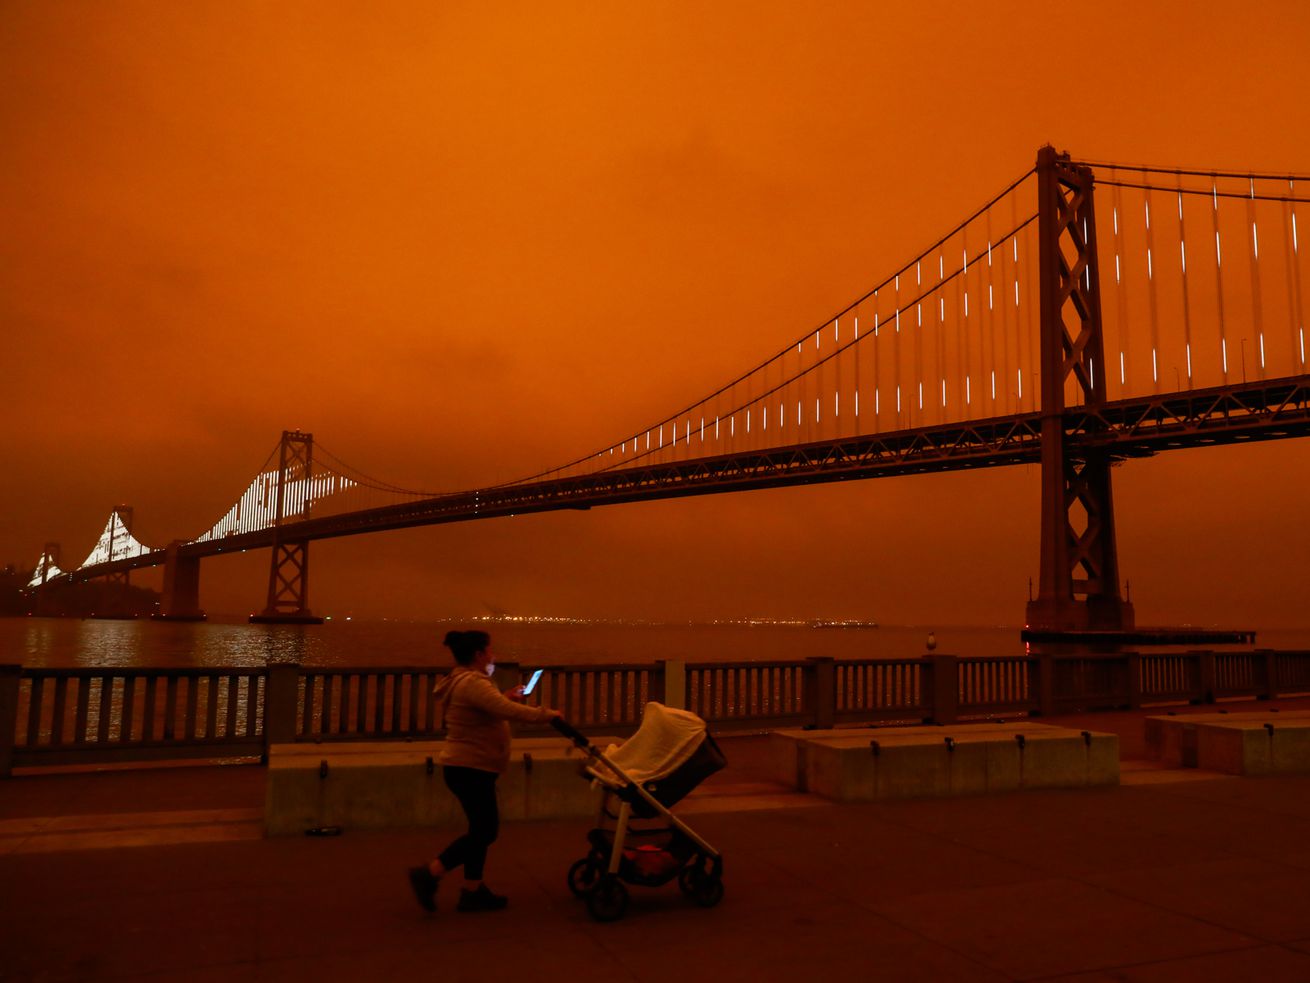 A person pushes a stroller along the waterfront in San Francisco with the Bay Bridge and an orange sky behind them.